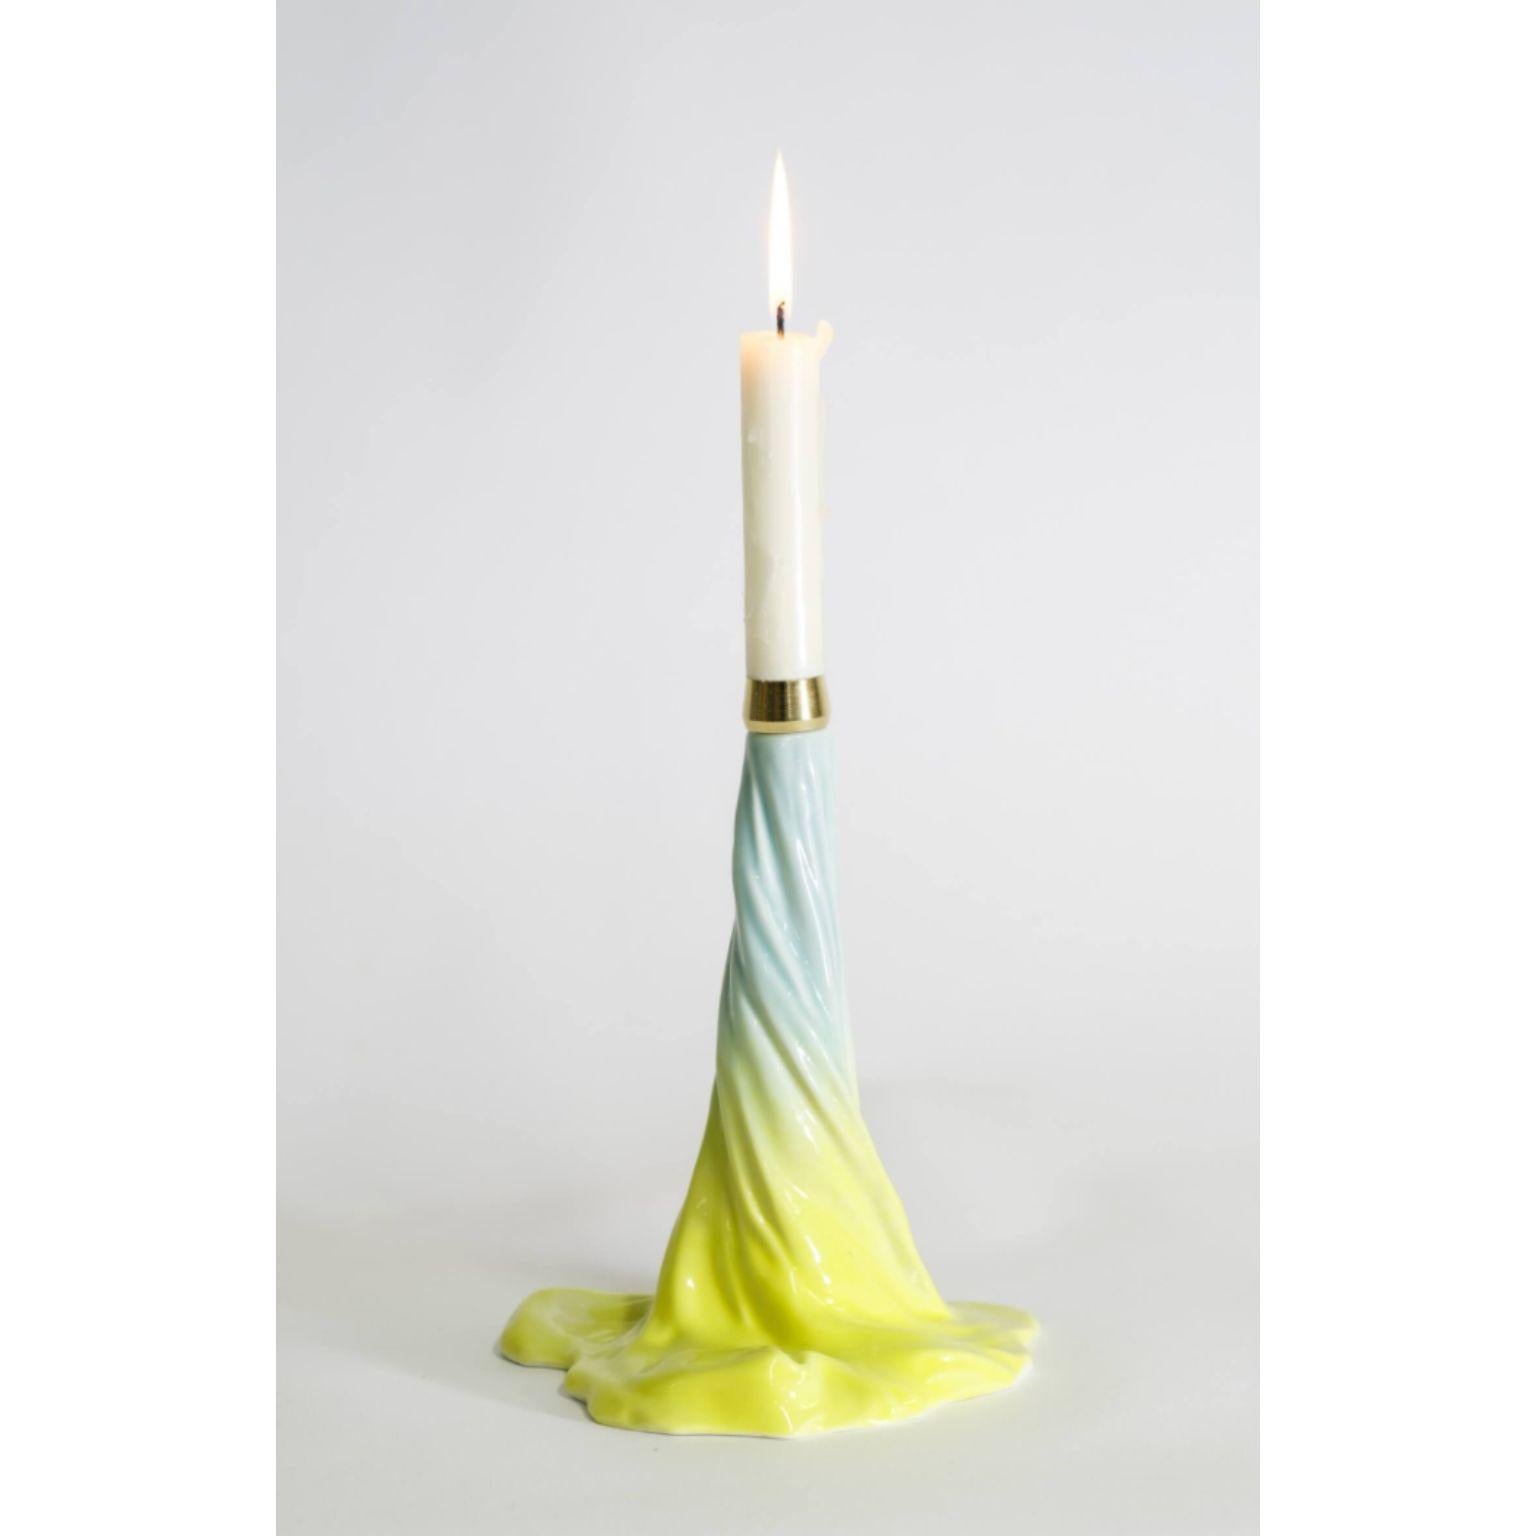 Drape candle holder by Mydriaz
Dimensions: D 26 x W 21 x H 16 cm
Materials: Fir green glazed porcelain.
Also available in different colors.

Our products are handmade in our workshop. Dimensions and finishes may vary slightly from one model to